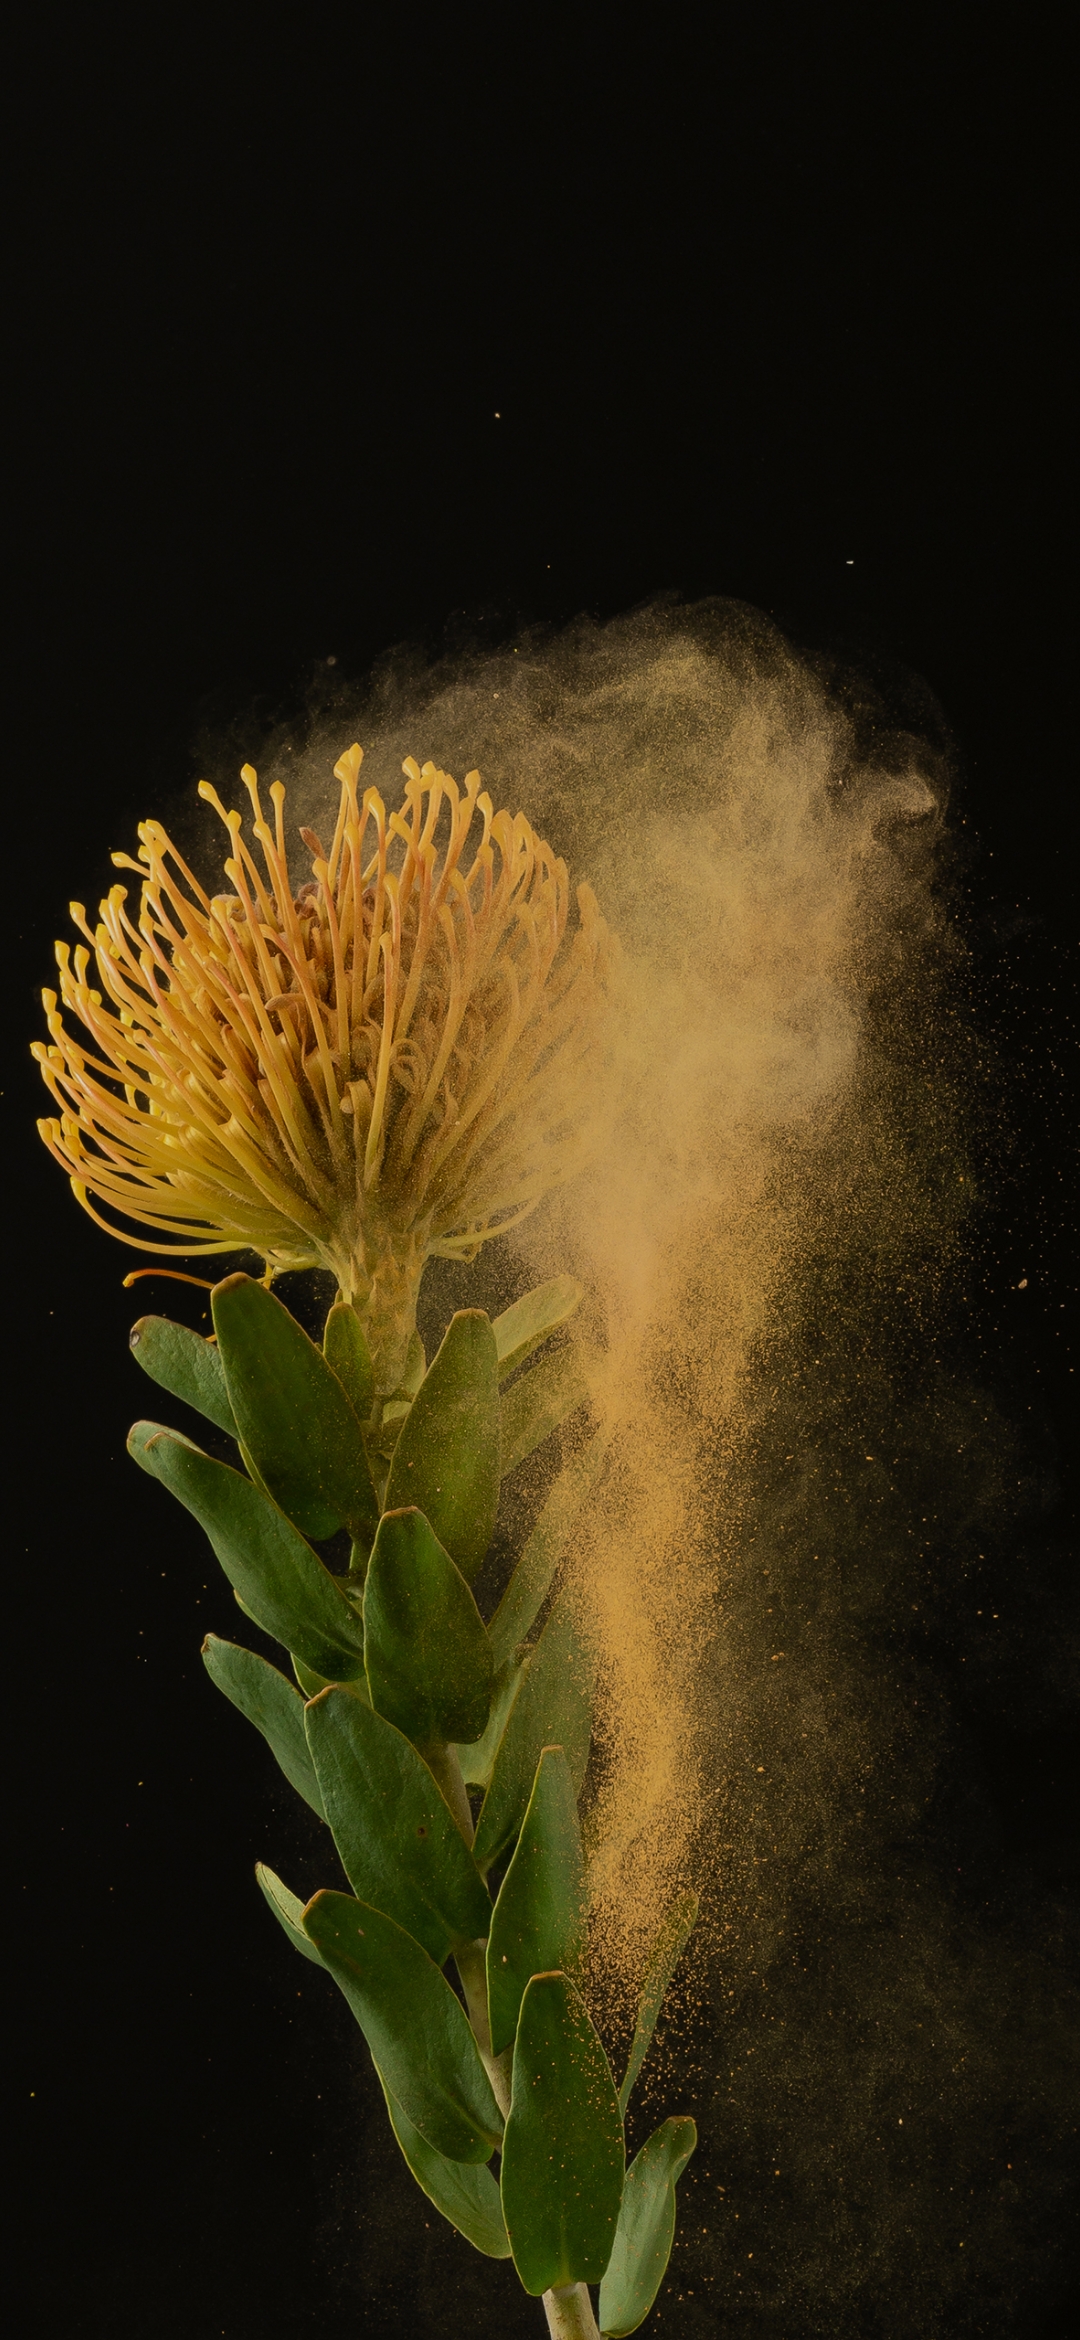 Dusty flower of a plant